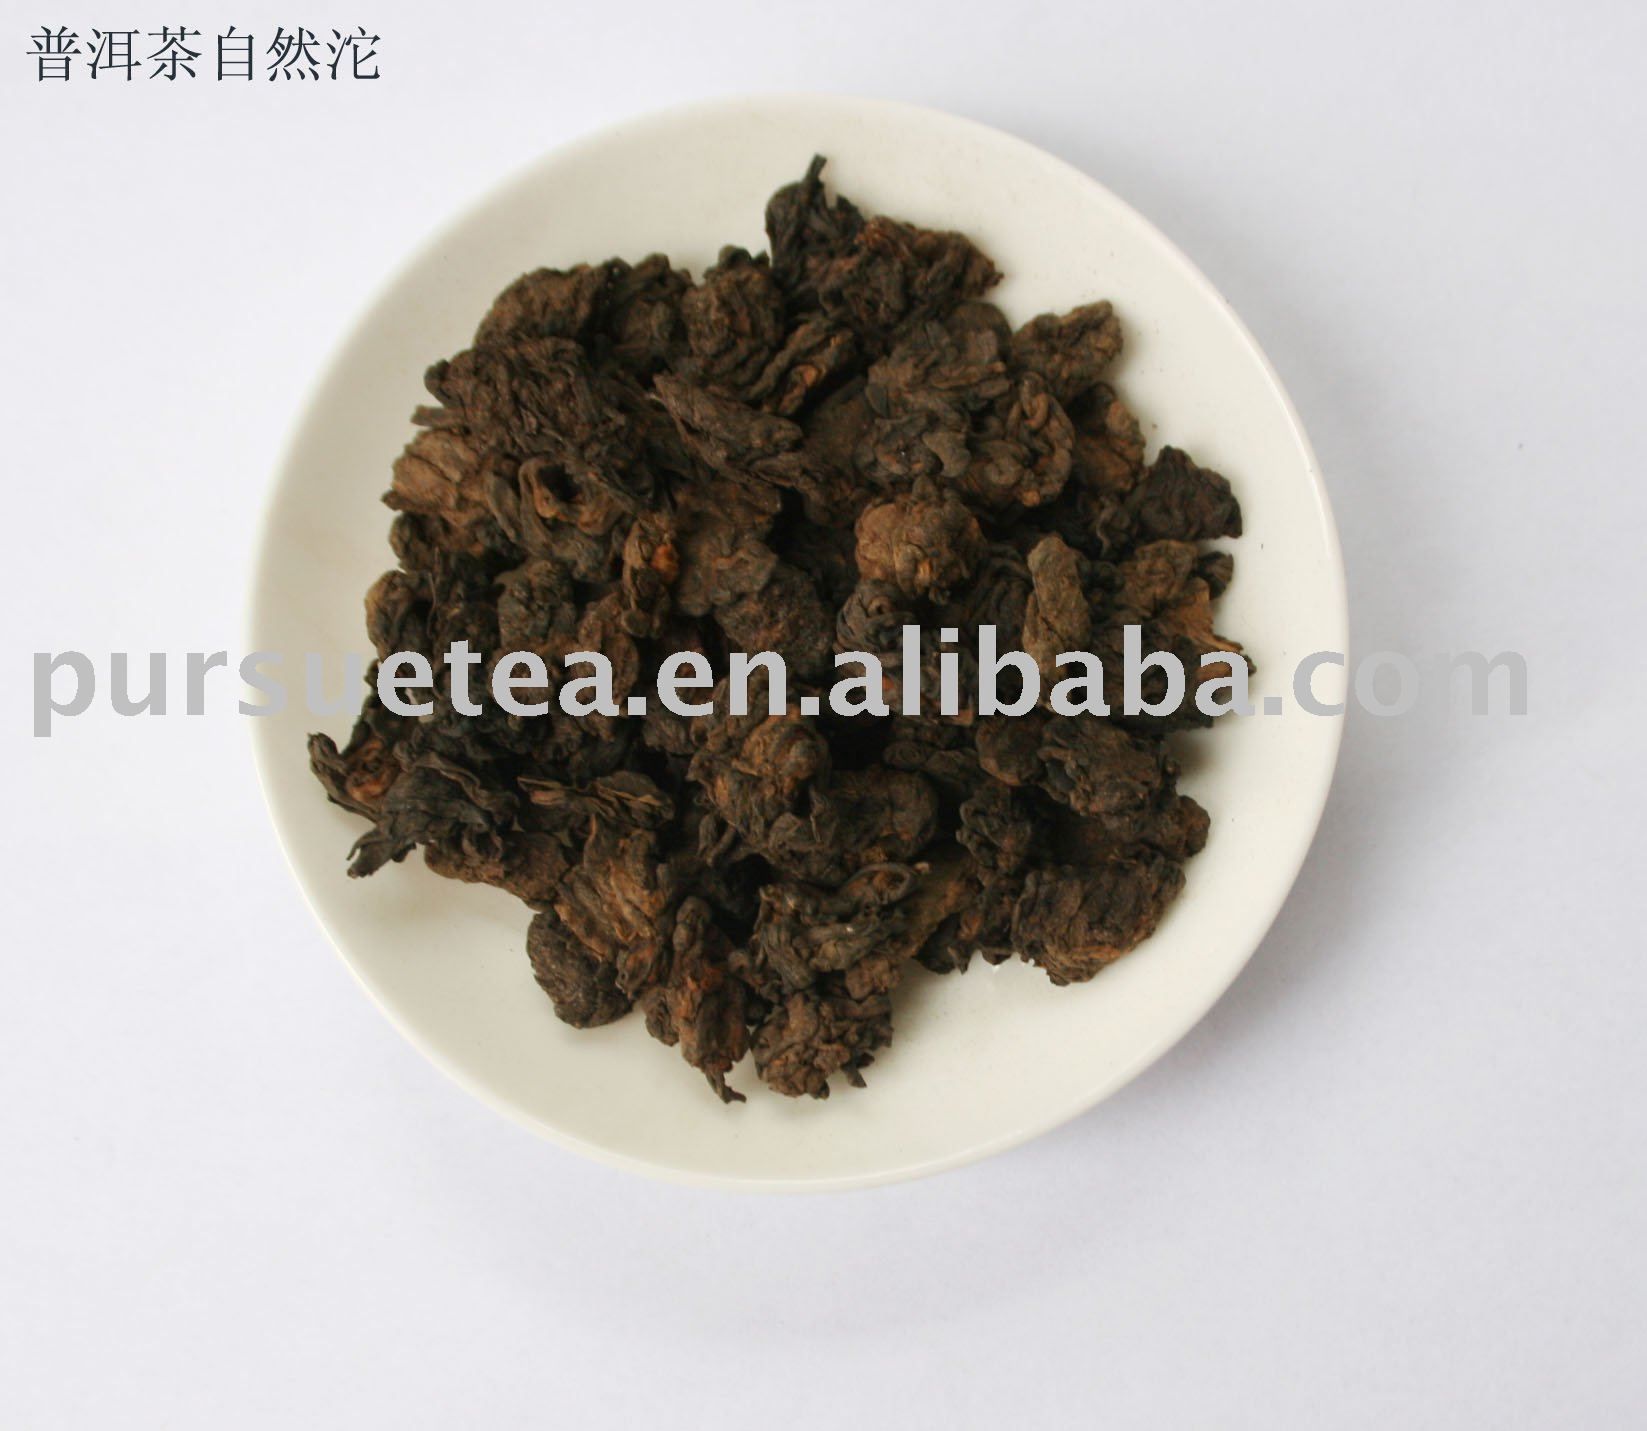 Traditon Chinese Tea Best Puer Loose Tea(Natural Tuo)